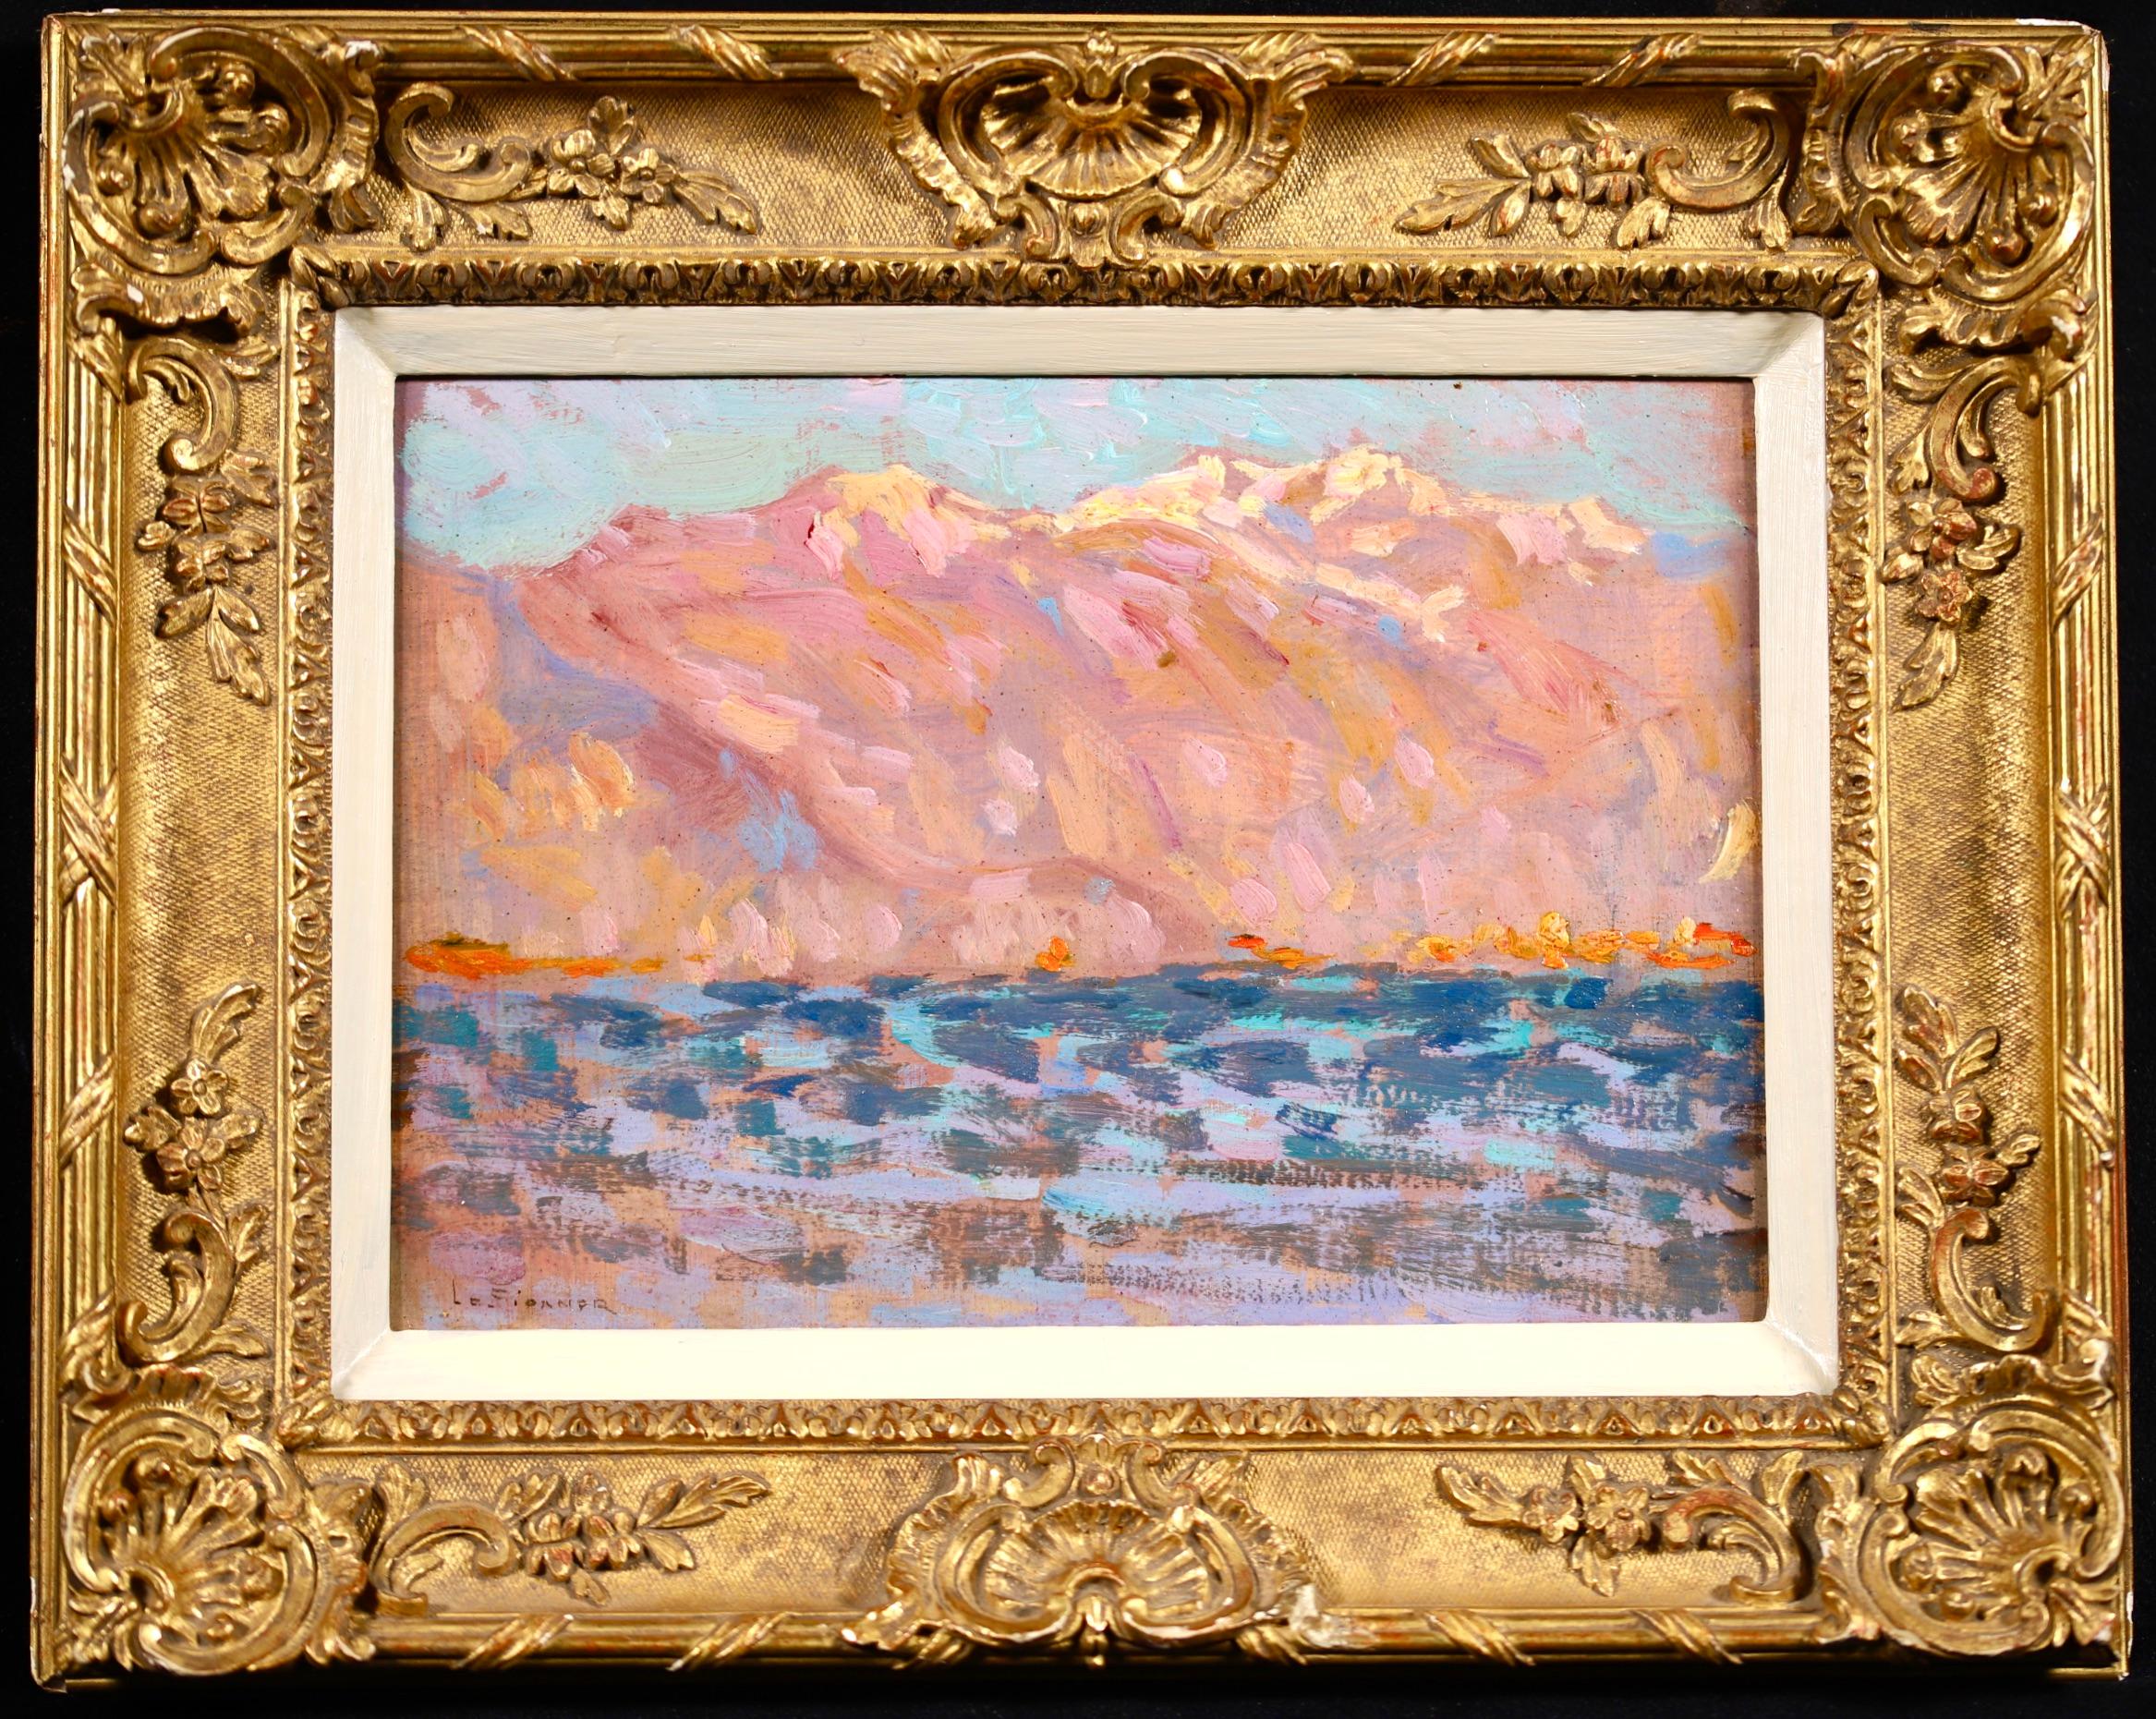 Signed post impressionist landscape oil on panel circa 1910 by French painter Henri le Sidaner. The work depicts a view of Lake Maggiore, a large lake located on the south side of the Alps across the Italian and Swiss border, and the second largest